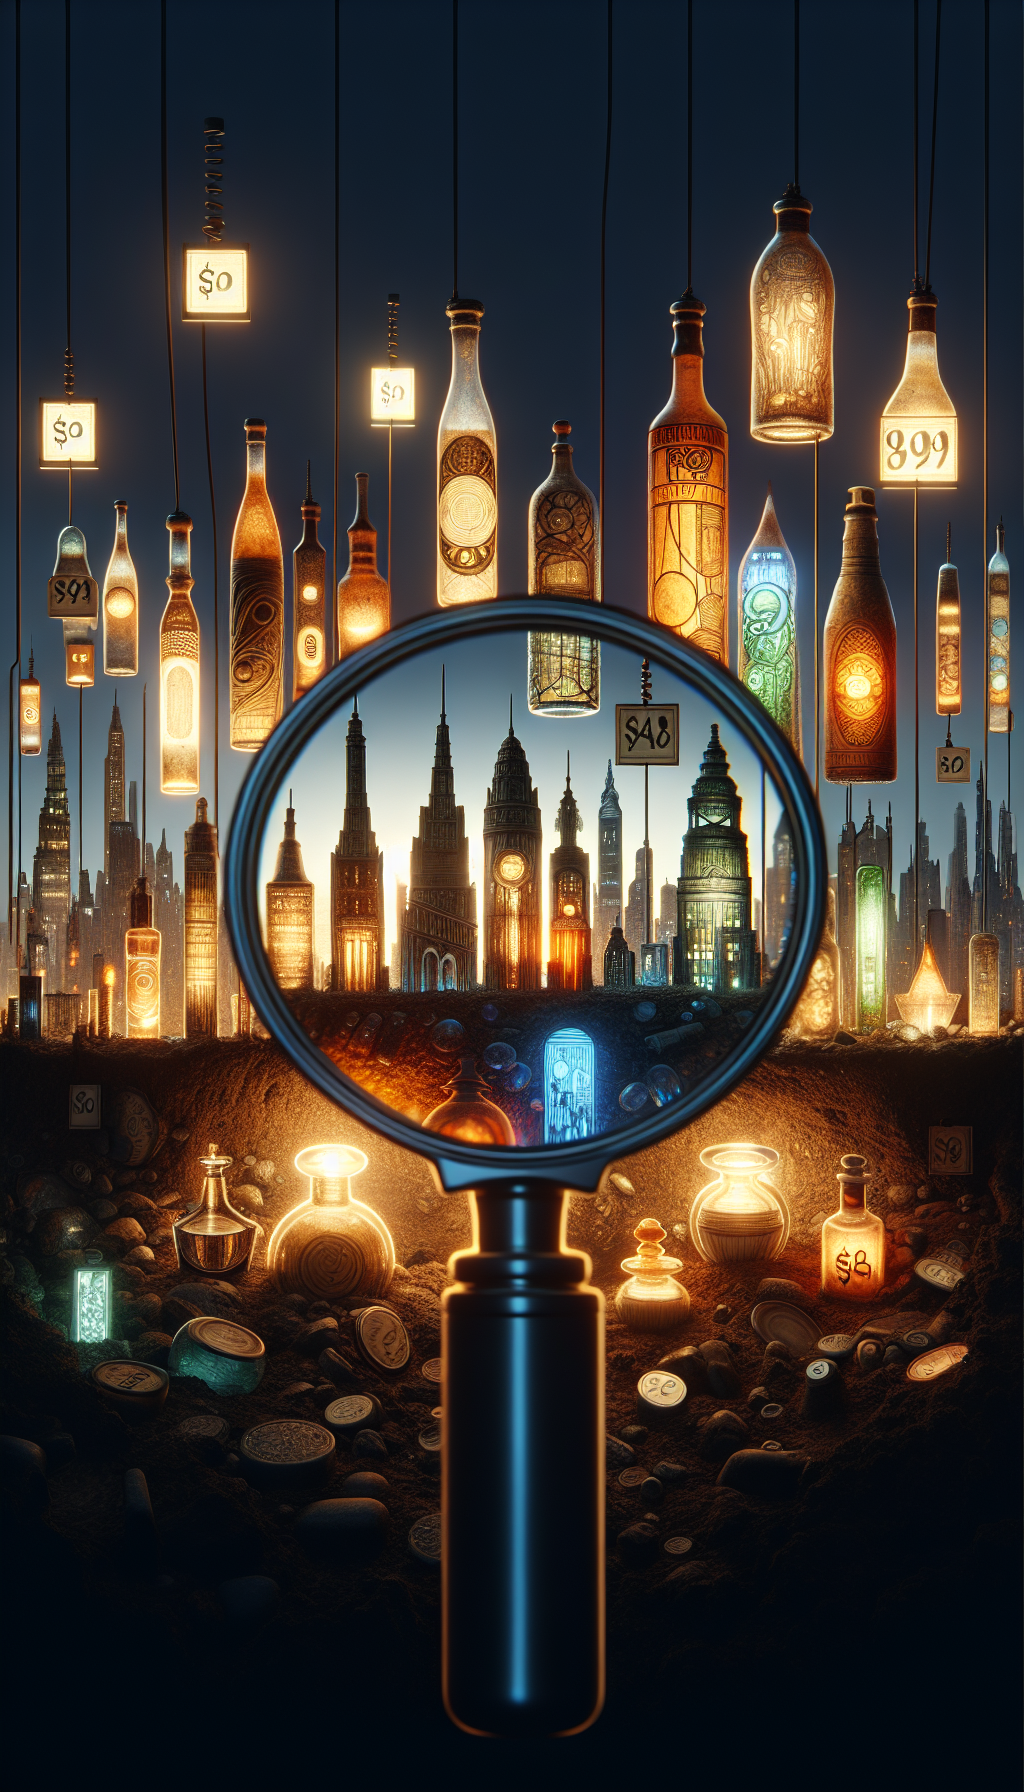 Beneath a magnifying glass, clusters of luminescent antique bottles rise from the soil like a cityscape at sunset, with price tags floating above like clouds, hinting at their value. Each bottle reflects a distinct artistic style—Art Nouveau curves, Art Deco angles, and Victorian ornateness—symbolizing the diverse eras they represent.